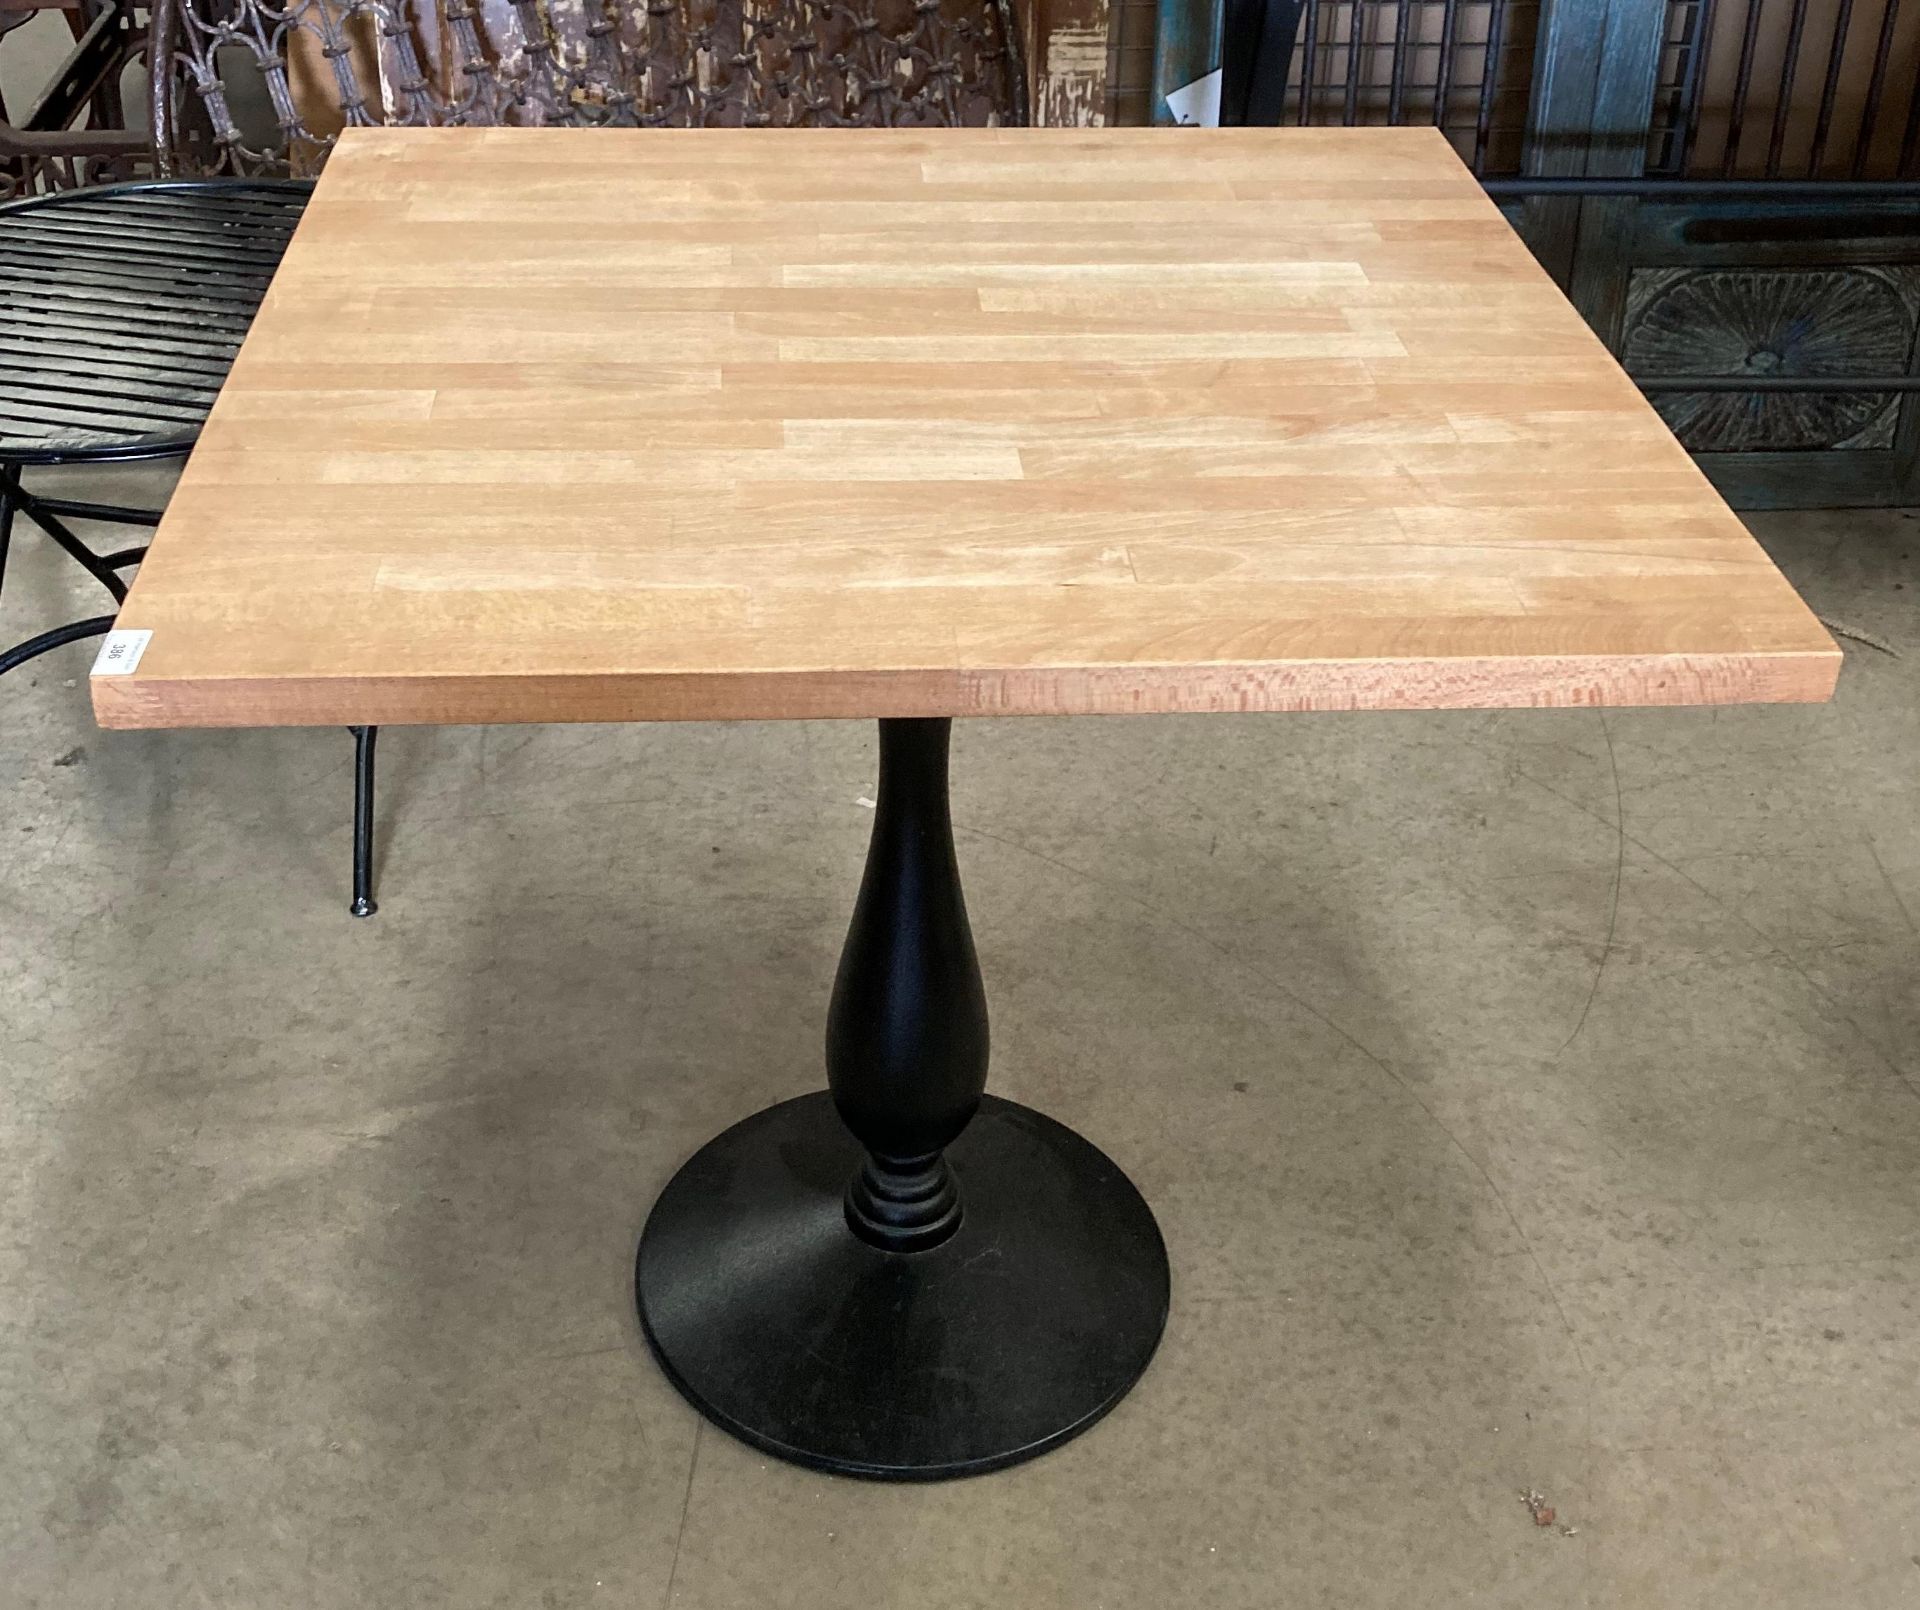 Light wood topped table with a black single column metal base 75 x 77 x 75cm high